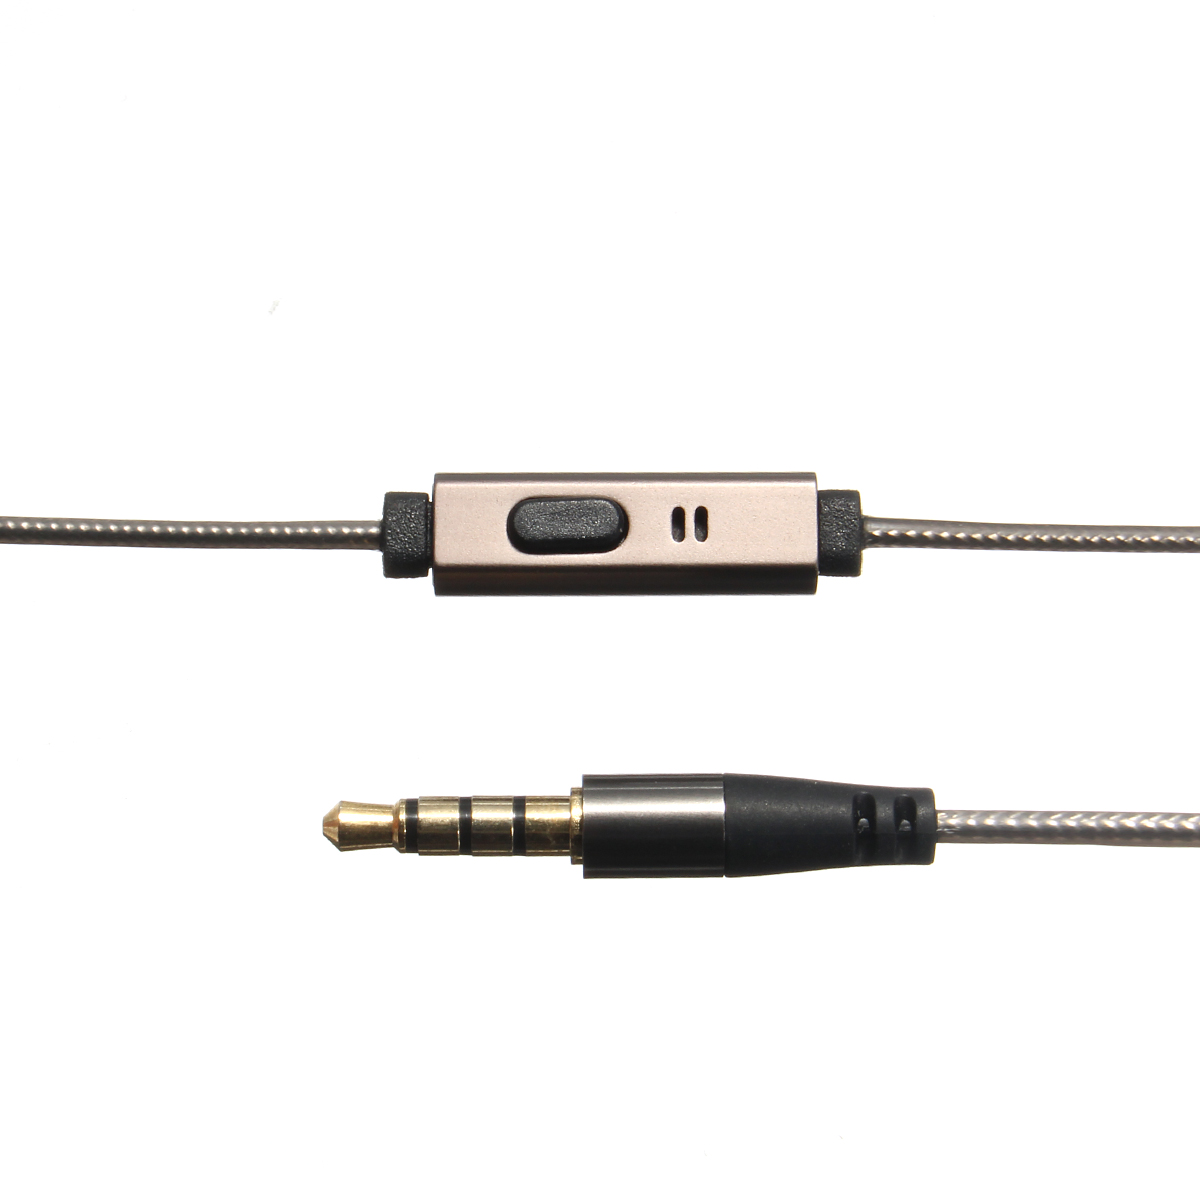 128M-Replacement-Audio-Cord-Cable-with-Mic-for-Shure-SE215-315-535-846-UE900-Headphone-1154717